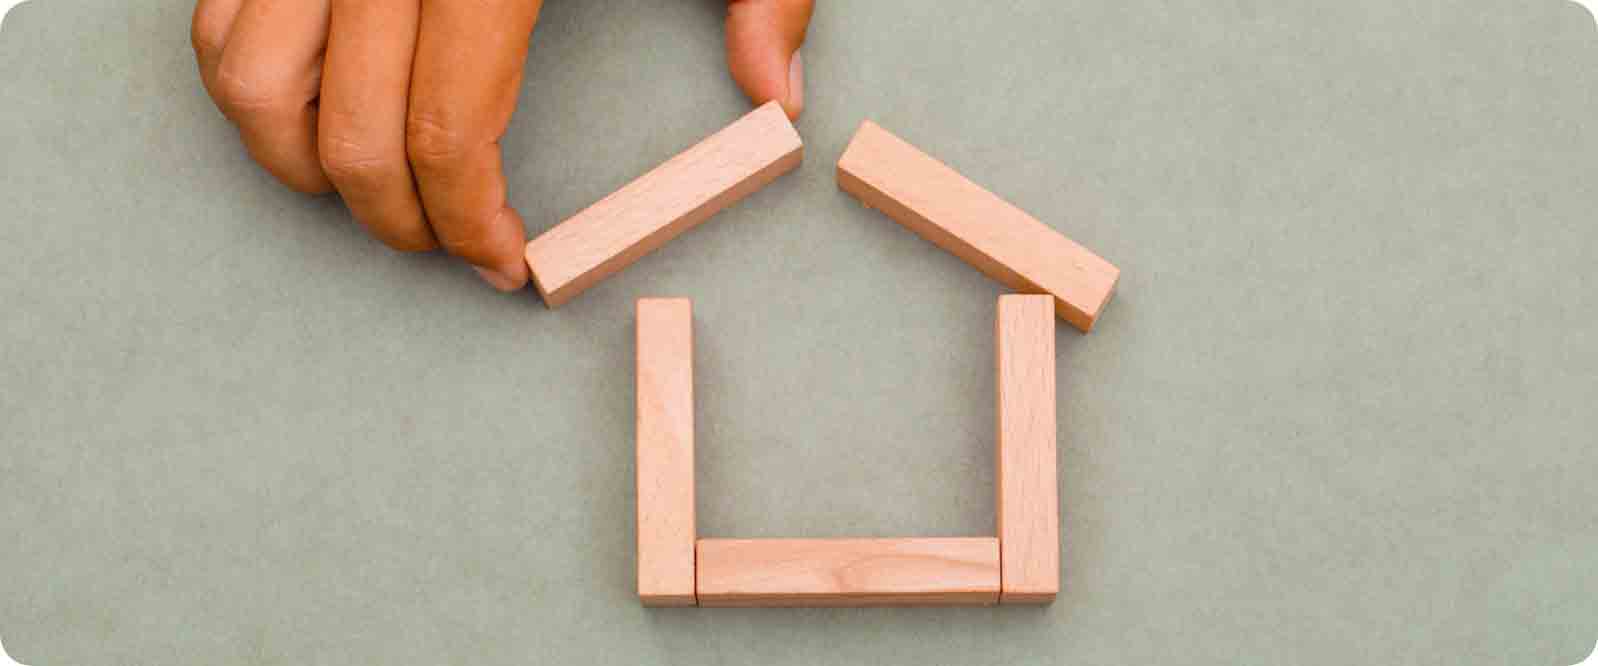 Refinancing your property